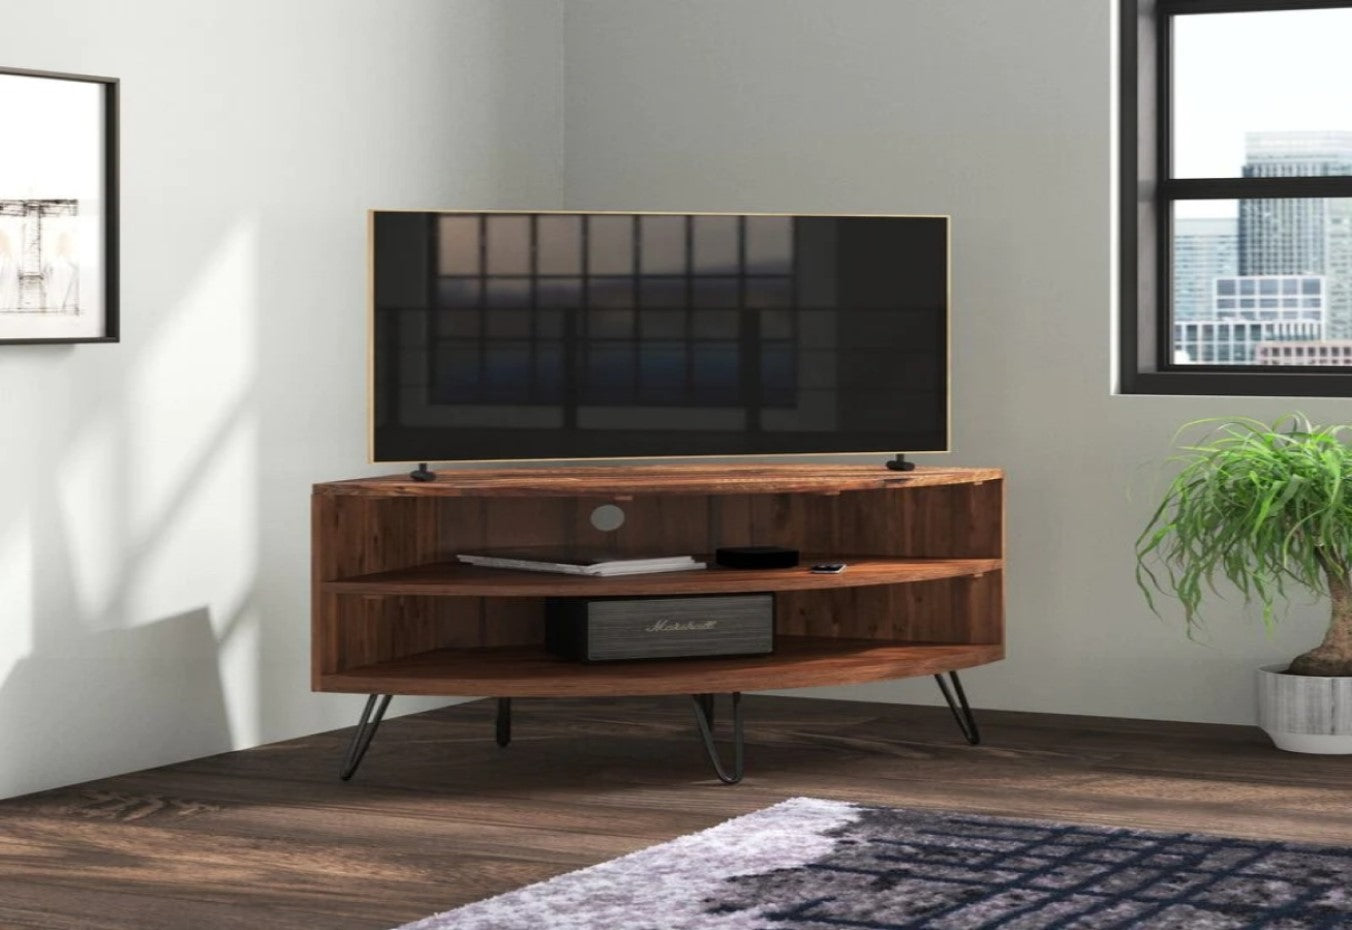 15 TV Cabinet Designs That Will Make Your Living Room Ultra Stylish -  Recommend.my | Feature wall living room, Living room design modern, Timber  feature wall